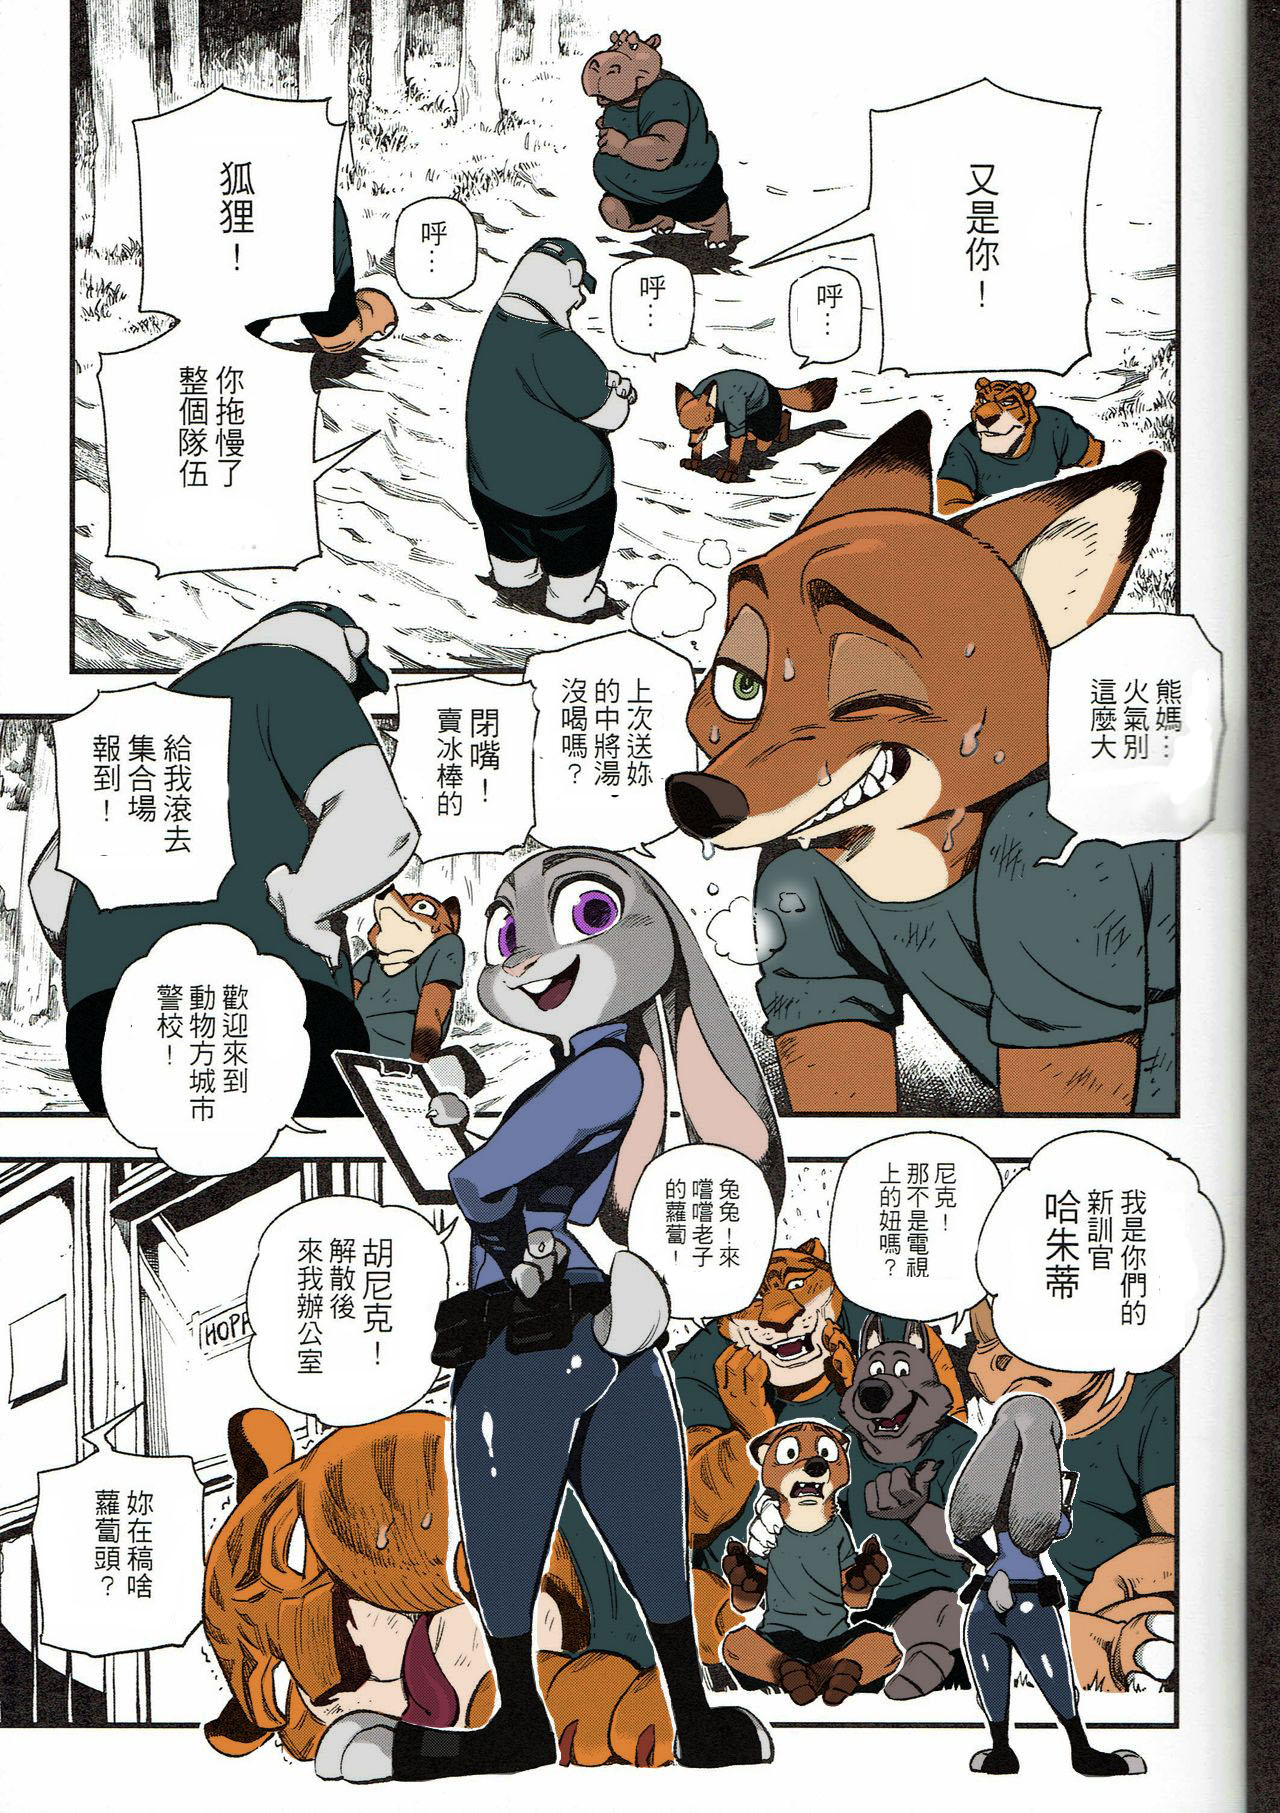 [Bear Hand] What Does The Fox Say? (Zootopia) [Chinese] [Colored] (FF28) [熊掌社 (俺正讀)] 狐狸怎麼叫? (ズートピア) [中国語] [カラー化]